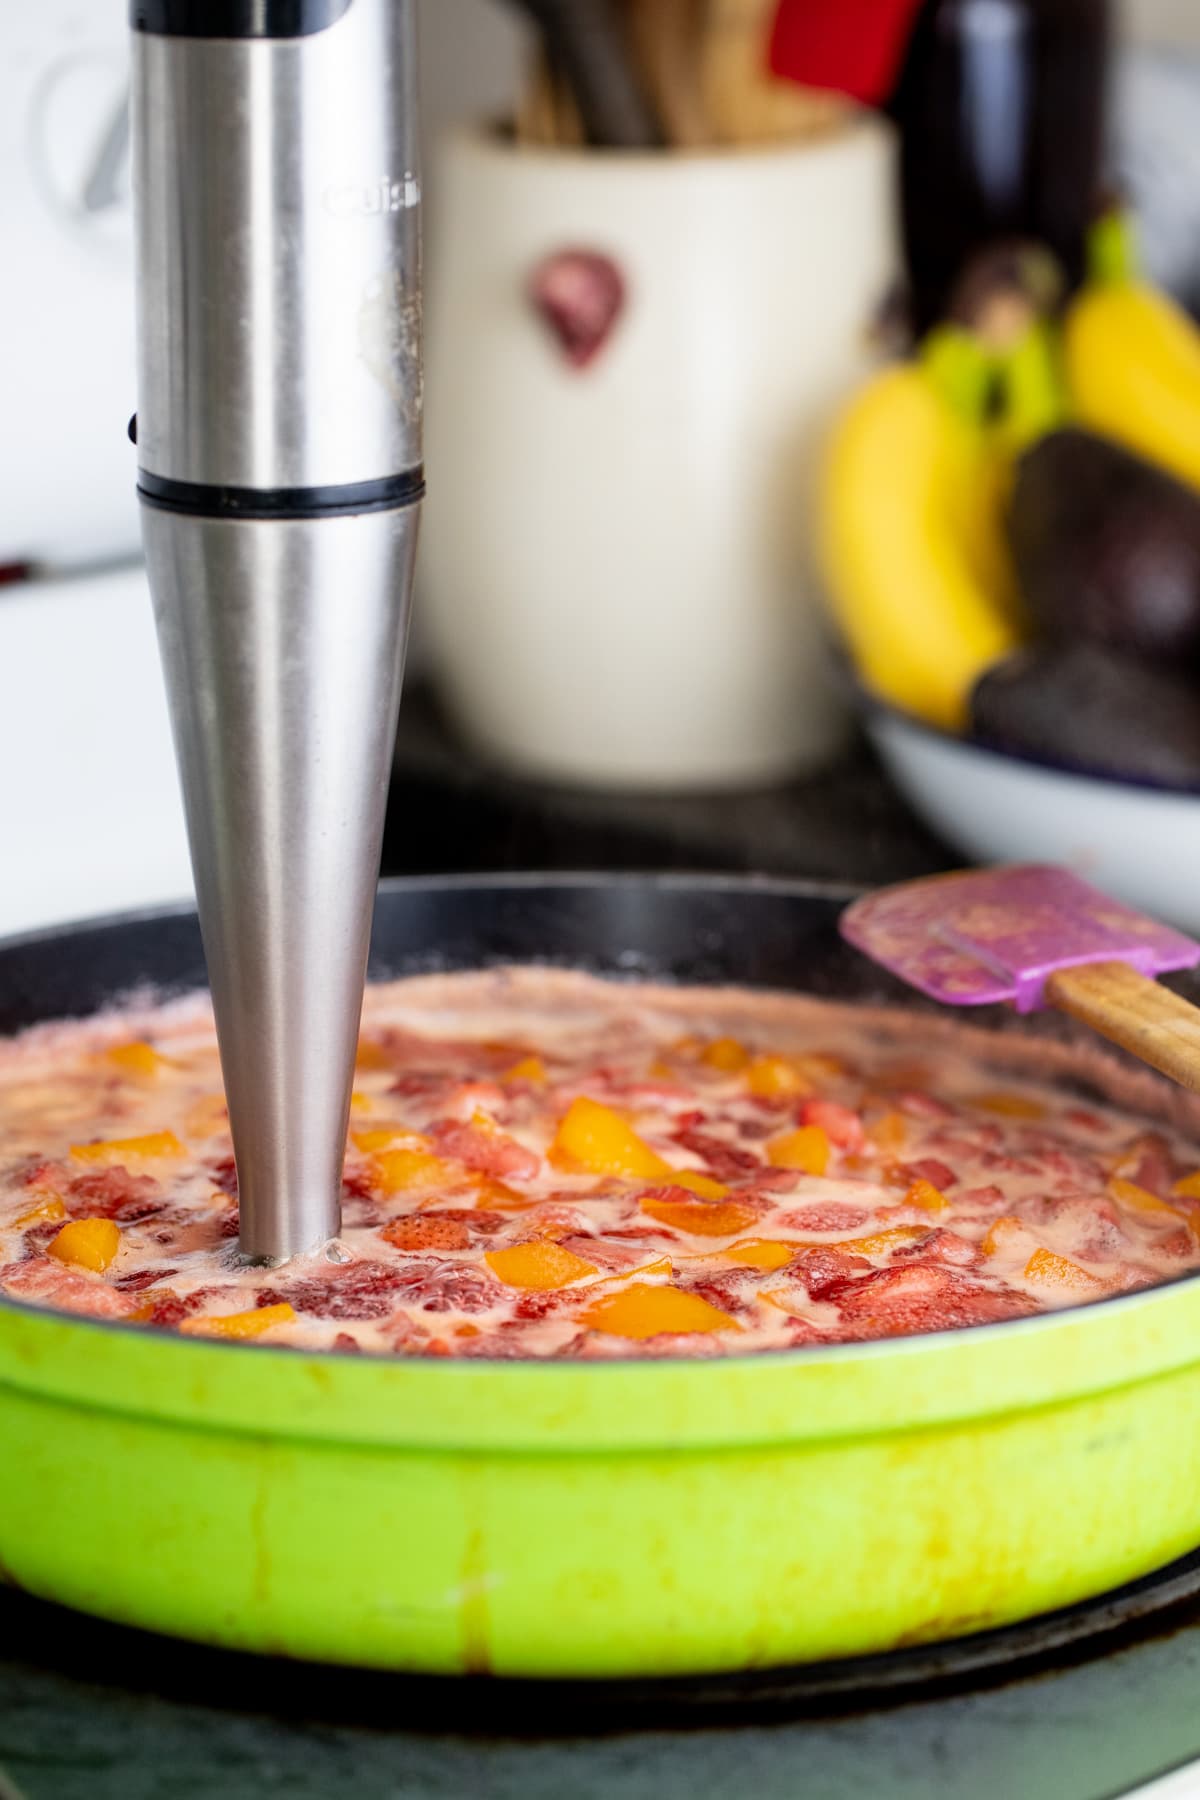 mashing the fruit with an immersion blender